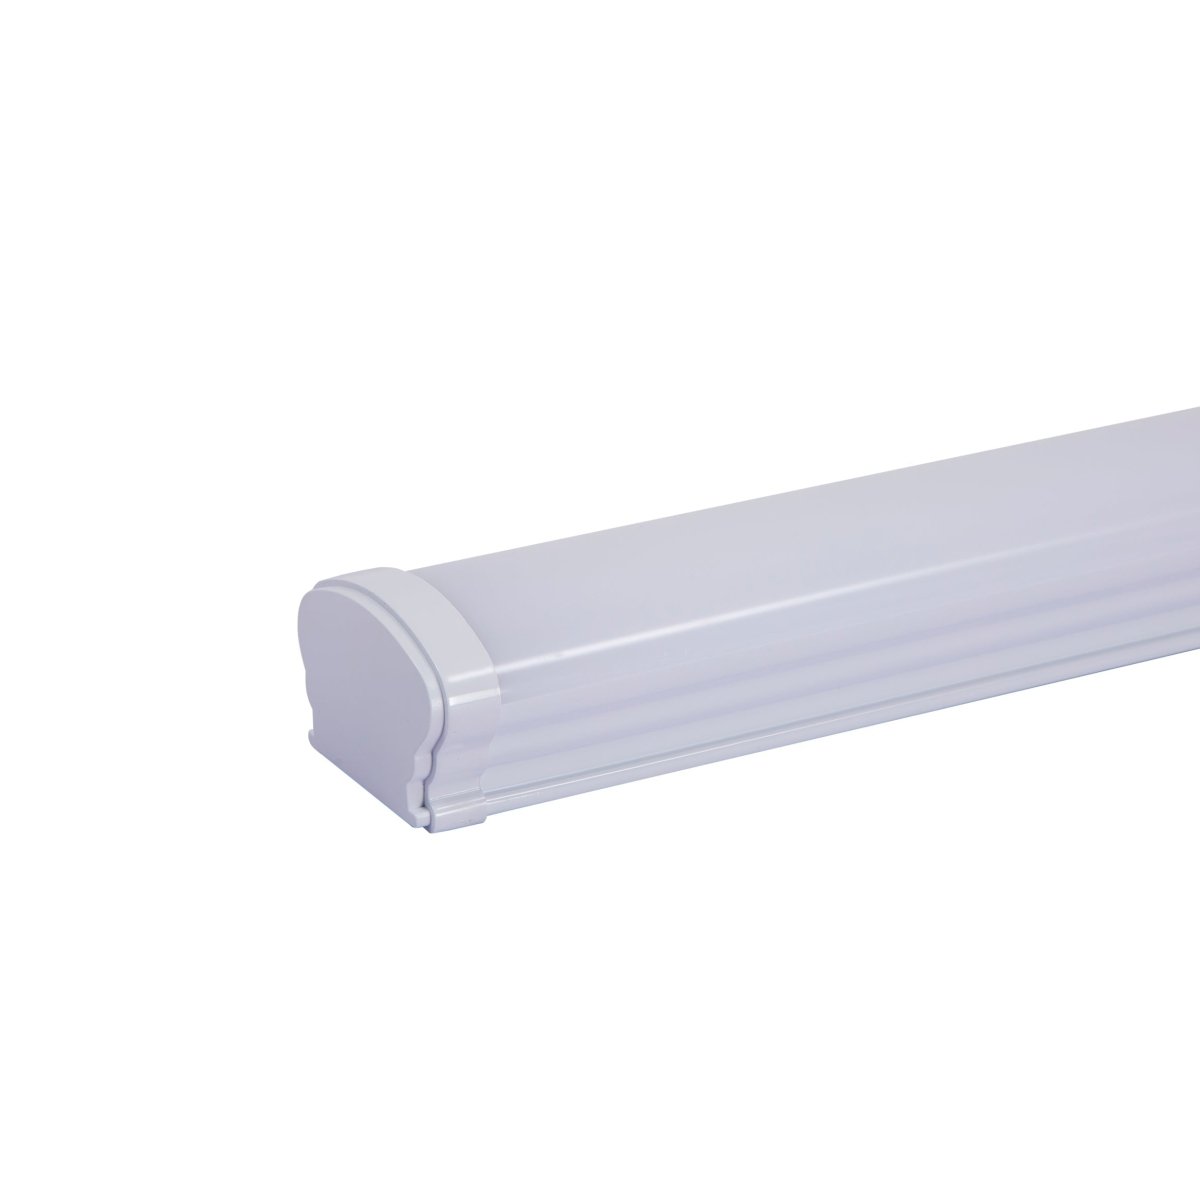 Main image of LED Tri-proof Batten Linear Fitting 48W 5000K Cool White IP65 120cm 4ft